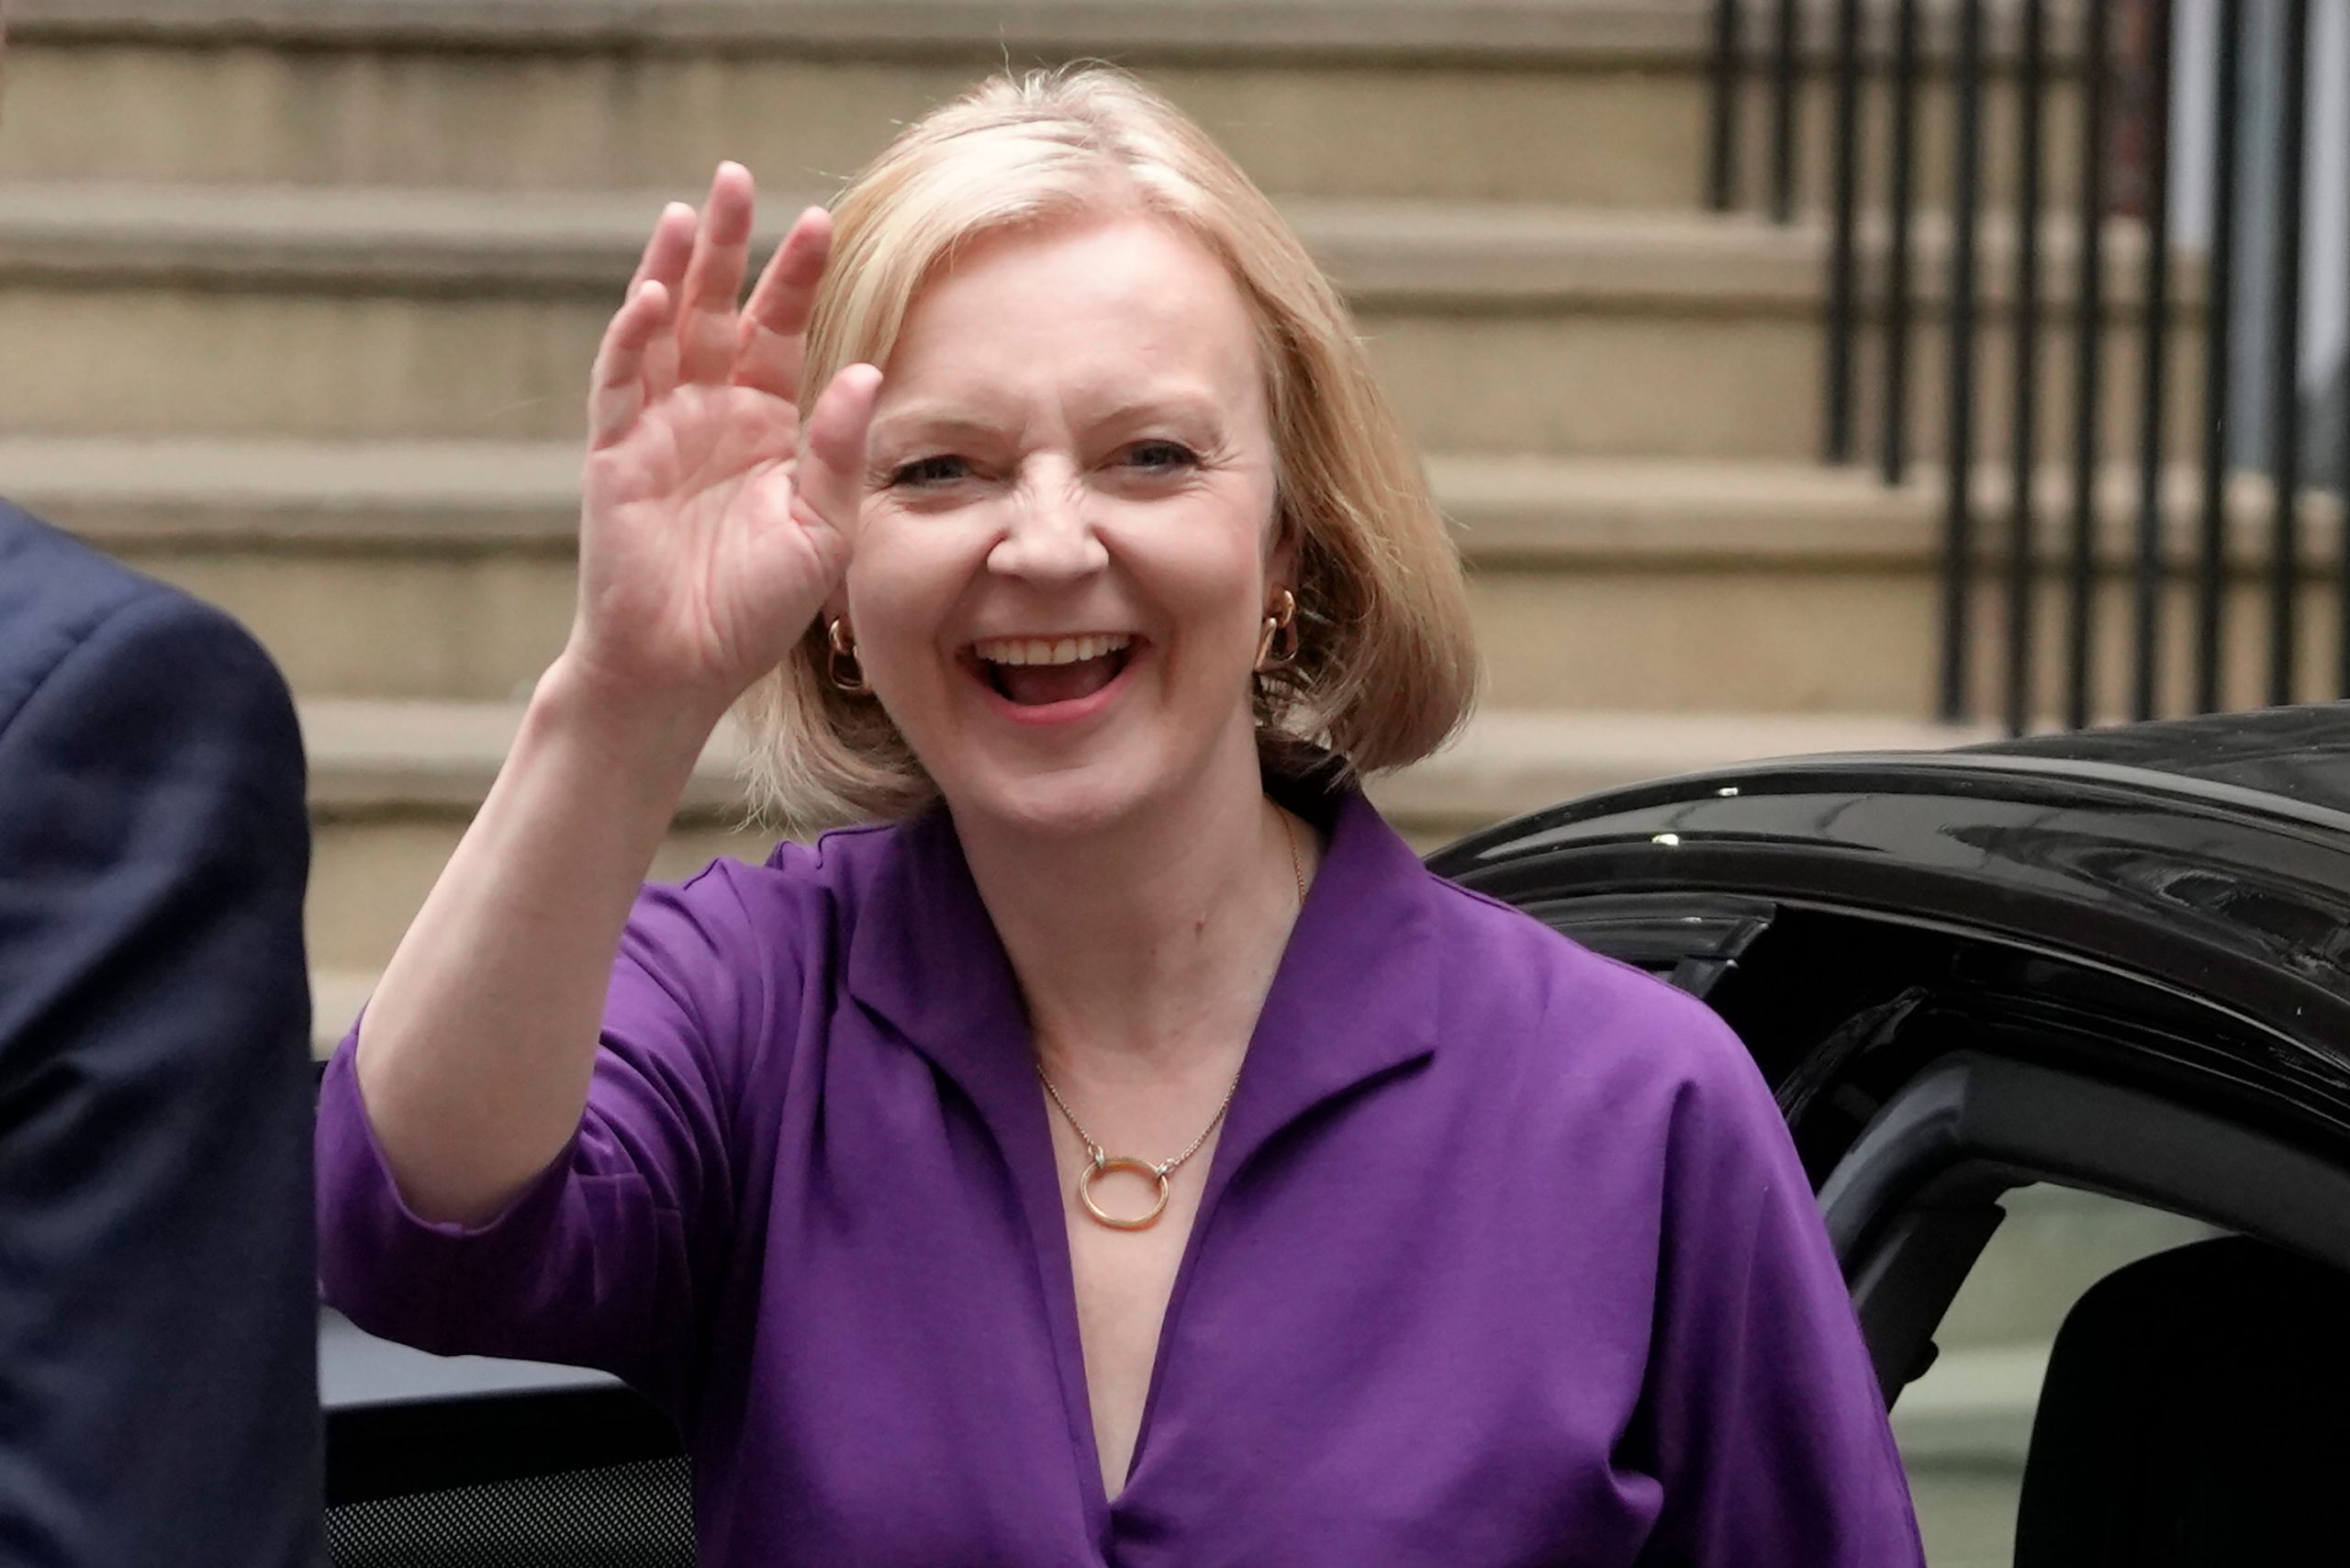 Liz Truss resigns as UK prime minister after shortest term in office